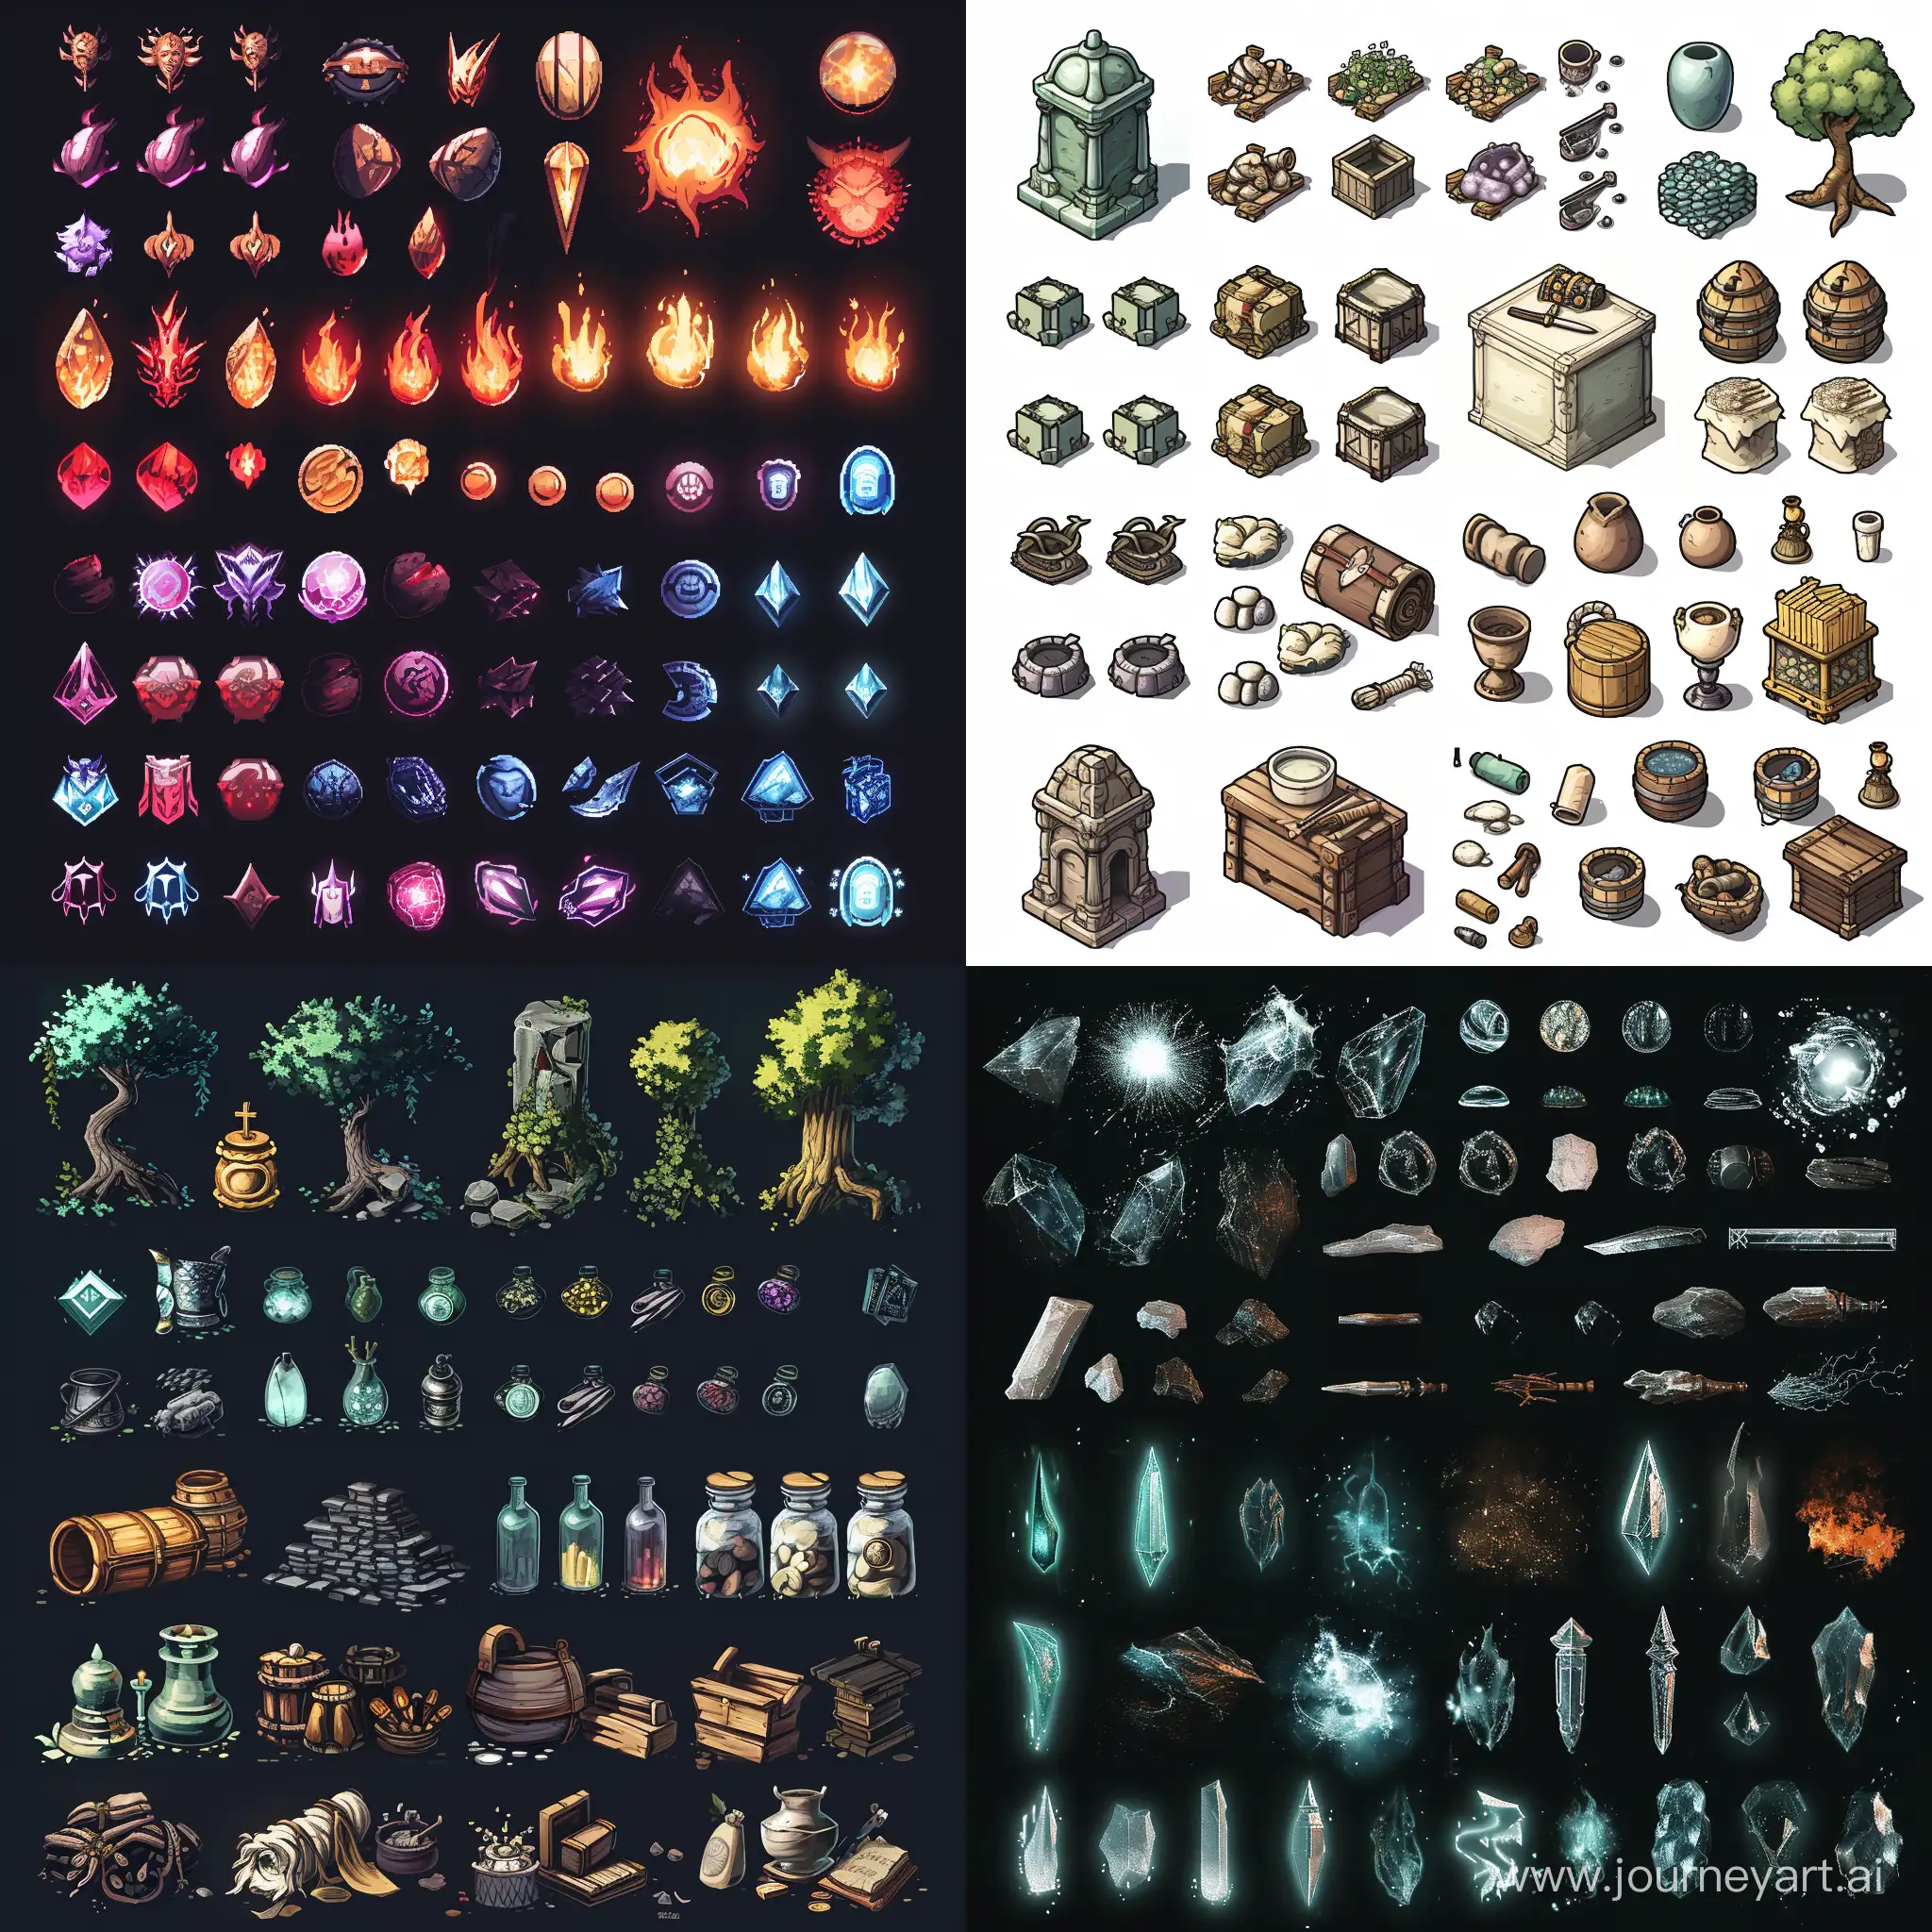 Fantasy-Item-Spritesheet-with-Magical-Effects-for-Game-Designers